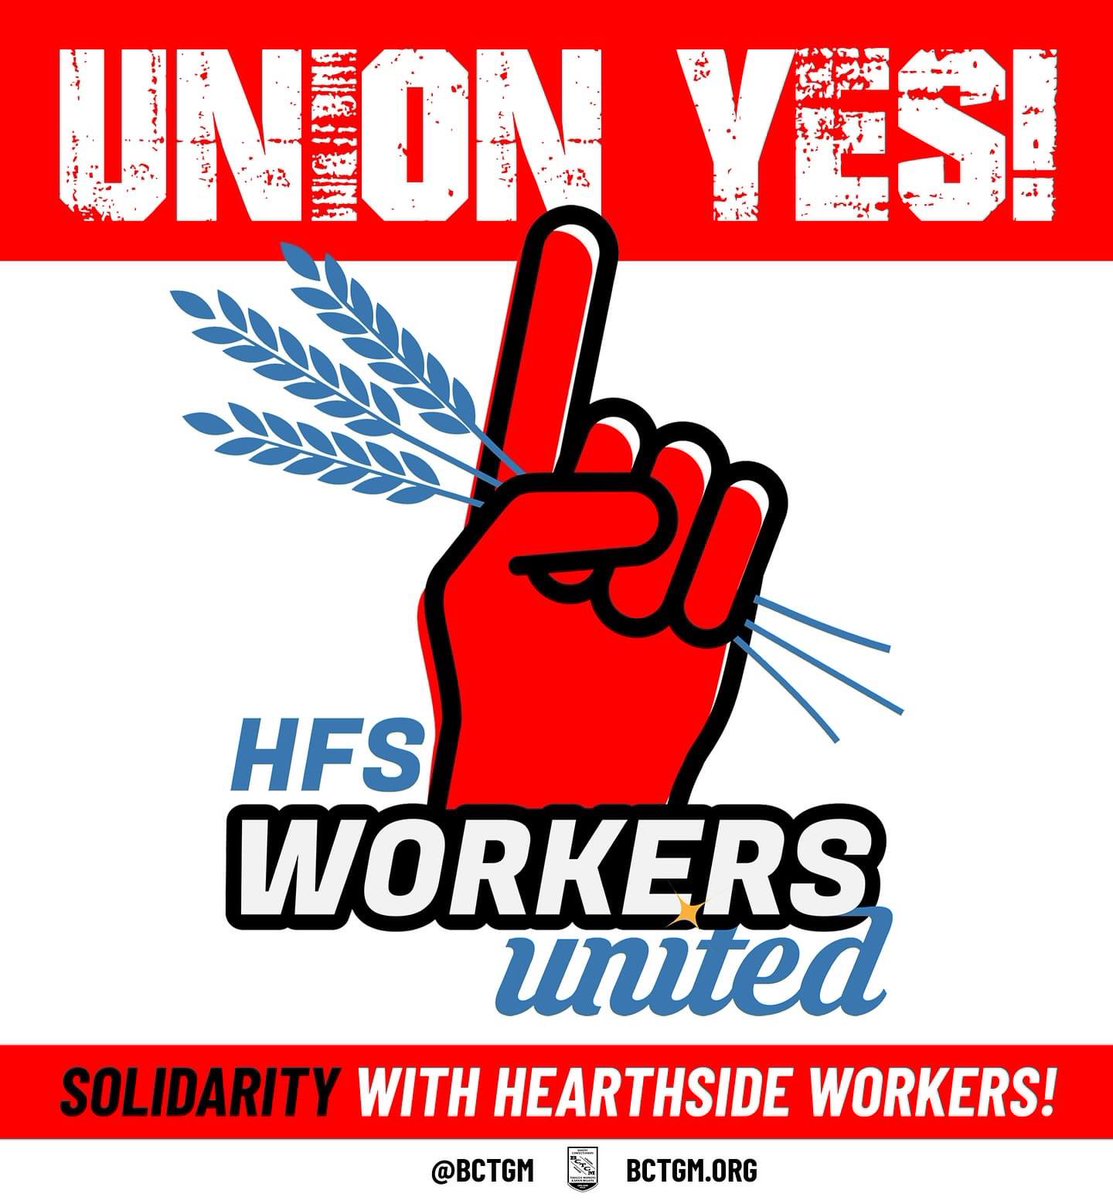 REMINDER: On May 7 and 8, workers employed at the Hearthside Food Solutions bakery in London, Ky. will vote in a Union election to be represented by the BCTGM. RT to show your support & leave a solidarity message in the comments!